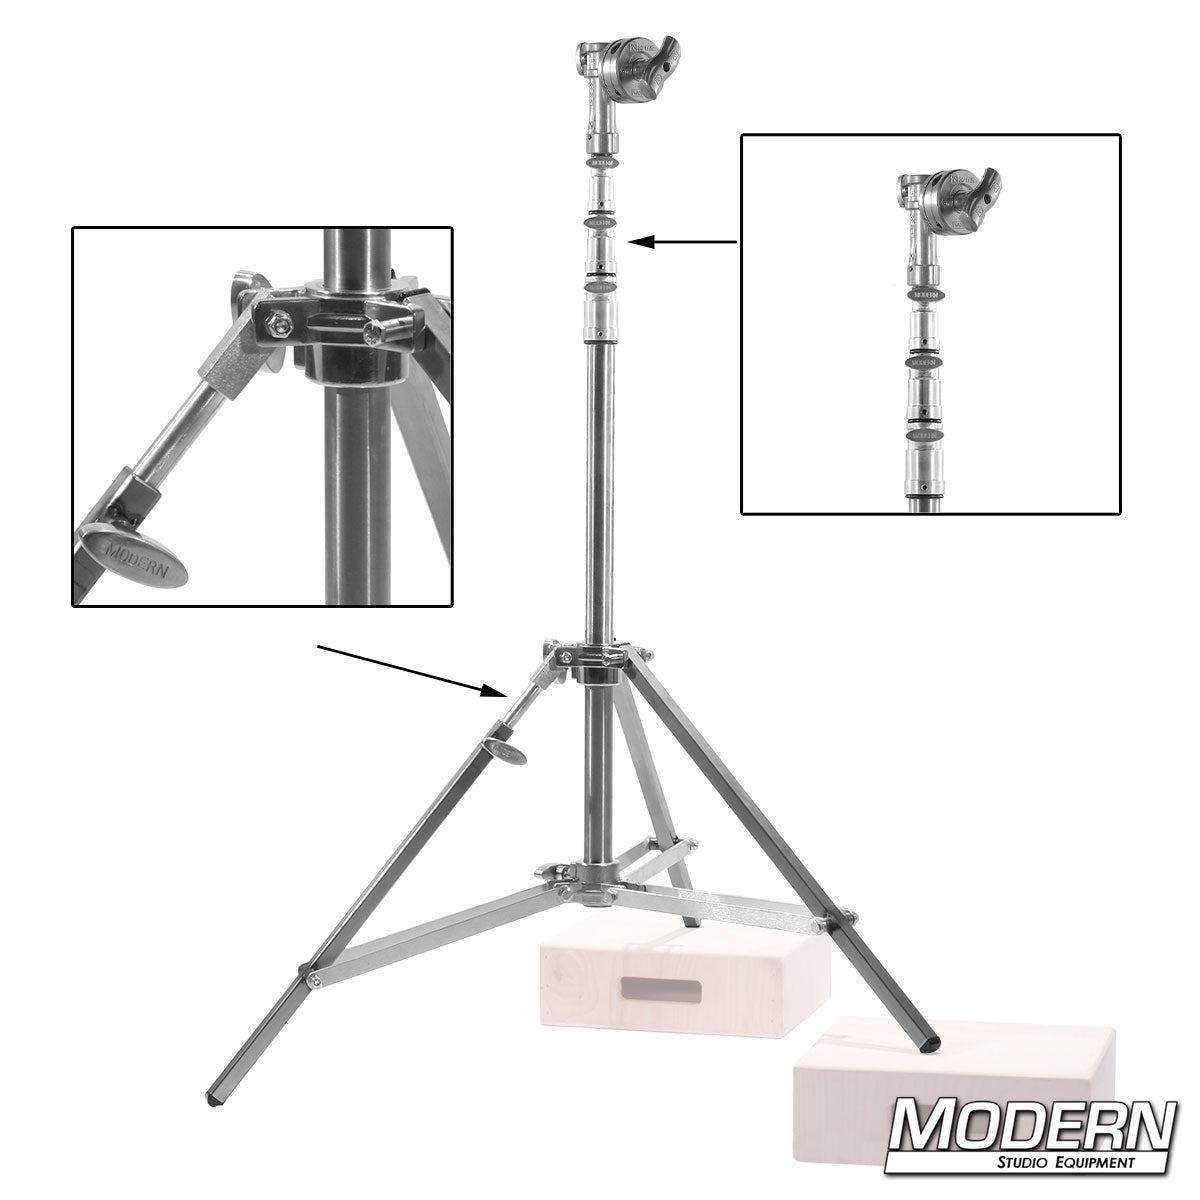 Combo Triple Riser Stand with Rocky Mountain Leg with 4-1/2" Grip Head